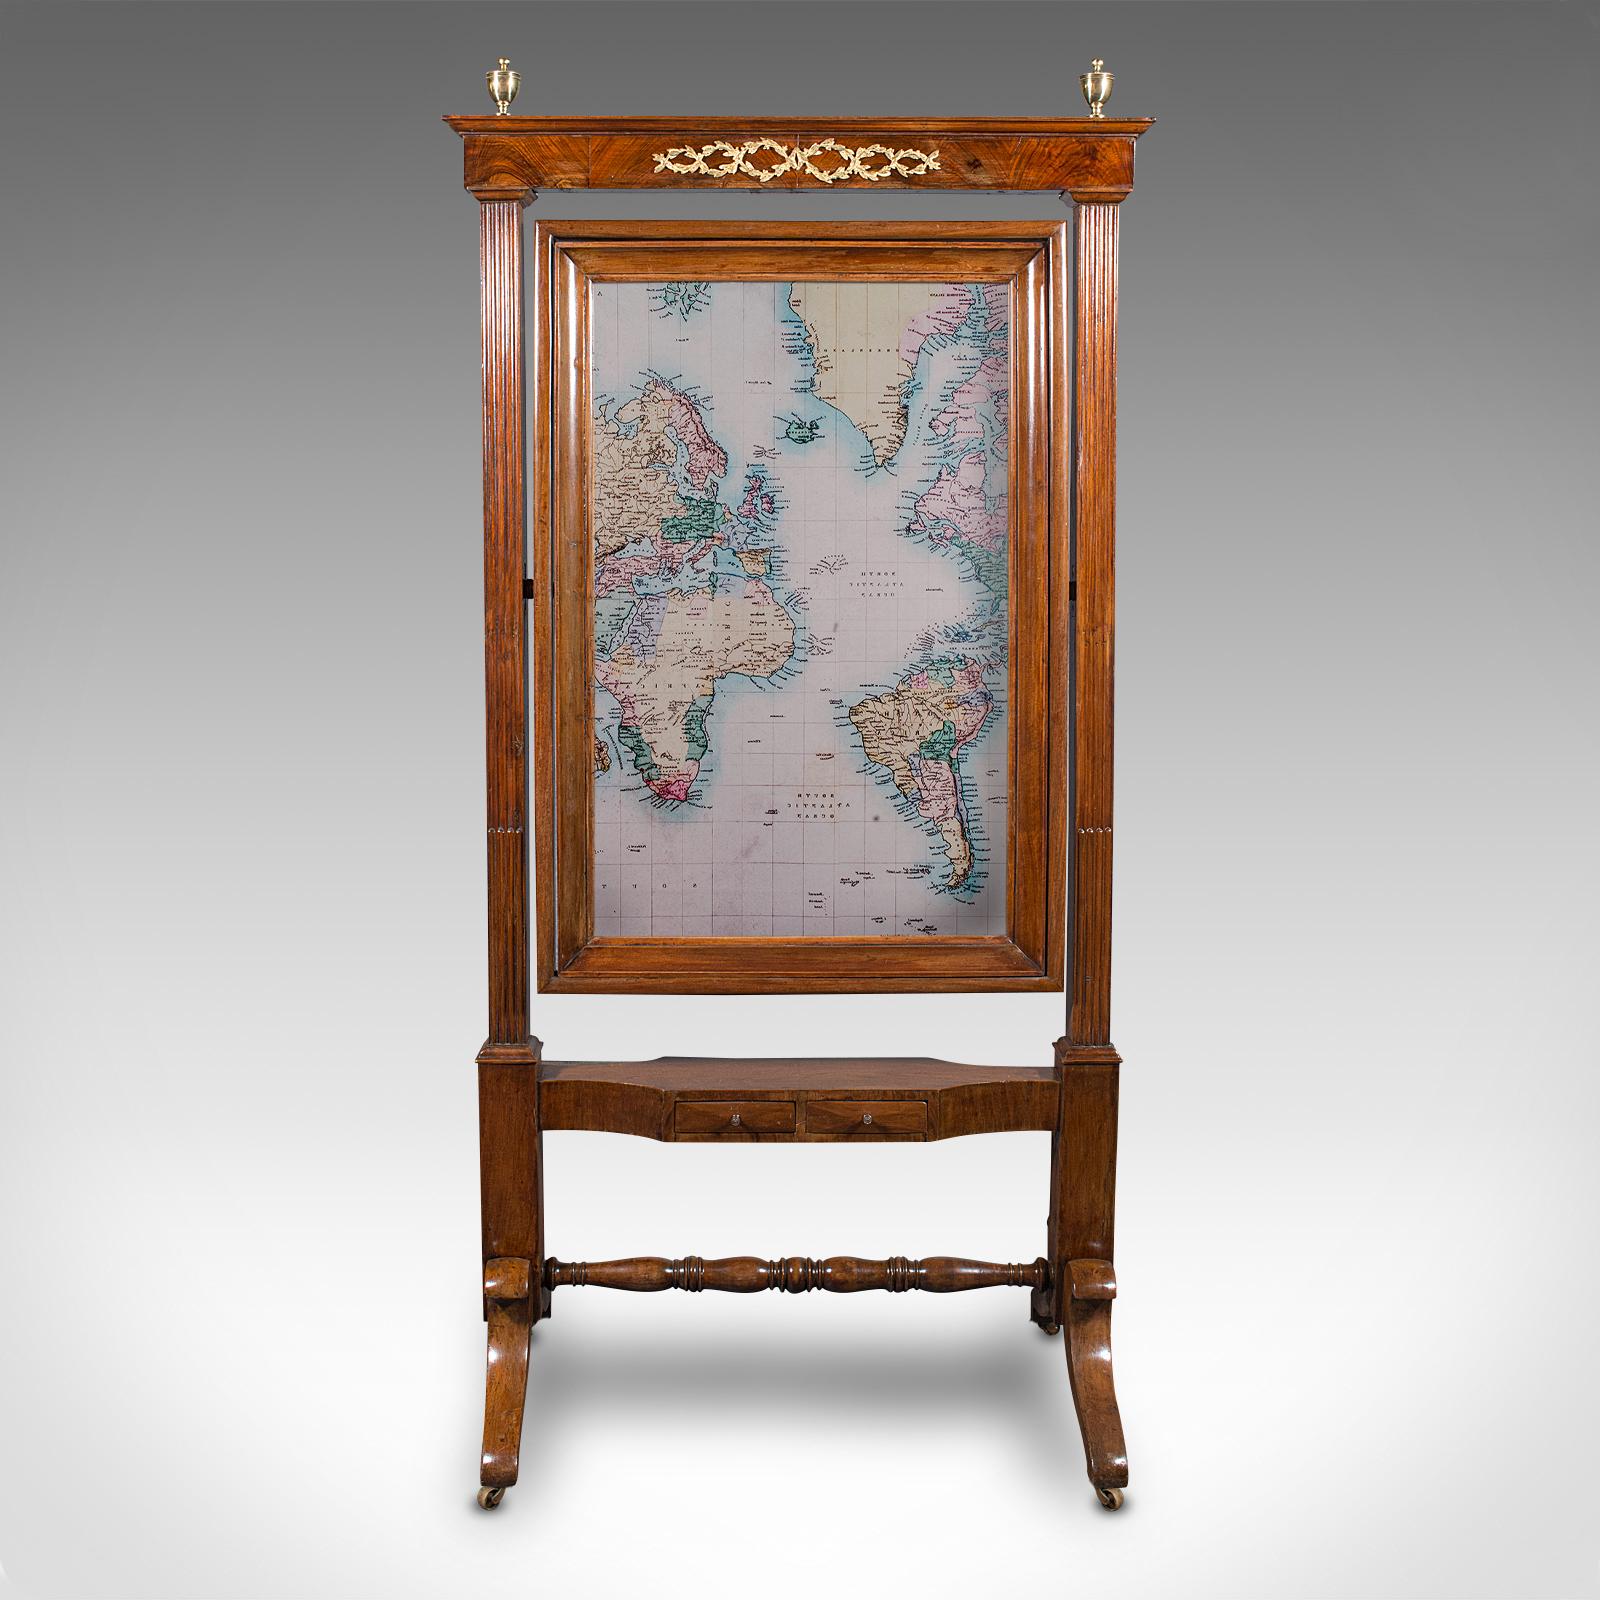 This is an antique shop's dressing mirror. An English, walnut cheval mirror with rare tilt and swivel action, dating to the Regency period and later, circa 1820.

Superb retail dressing mirror with excellent proportion
Displaying a desirable aged